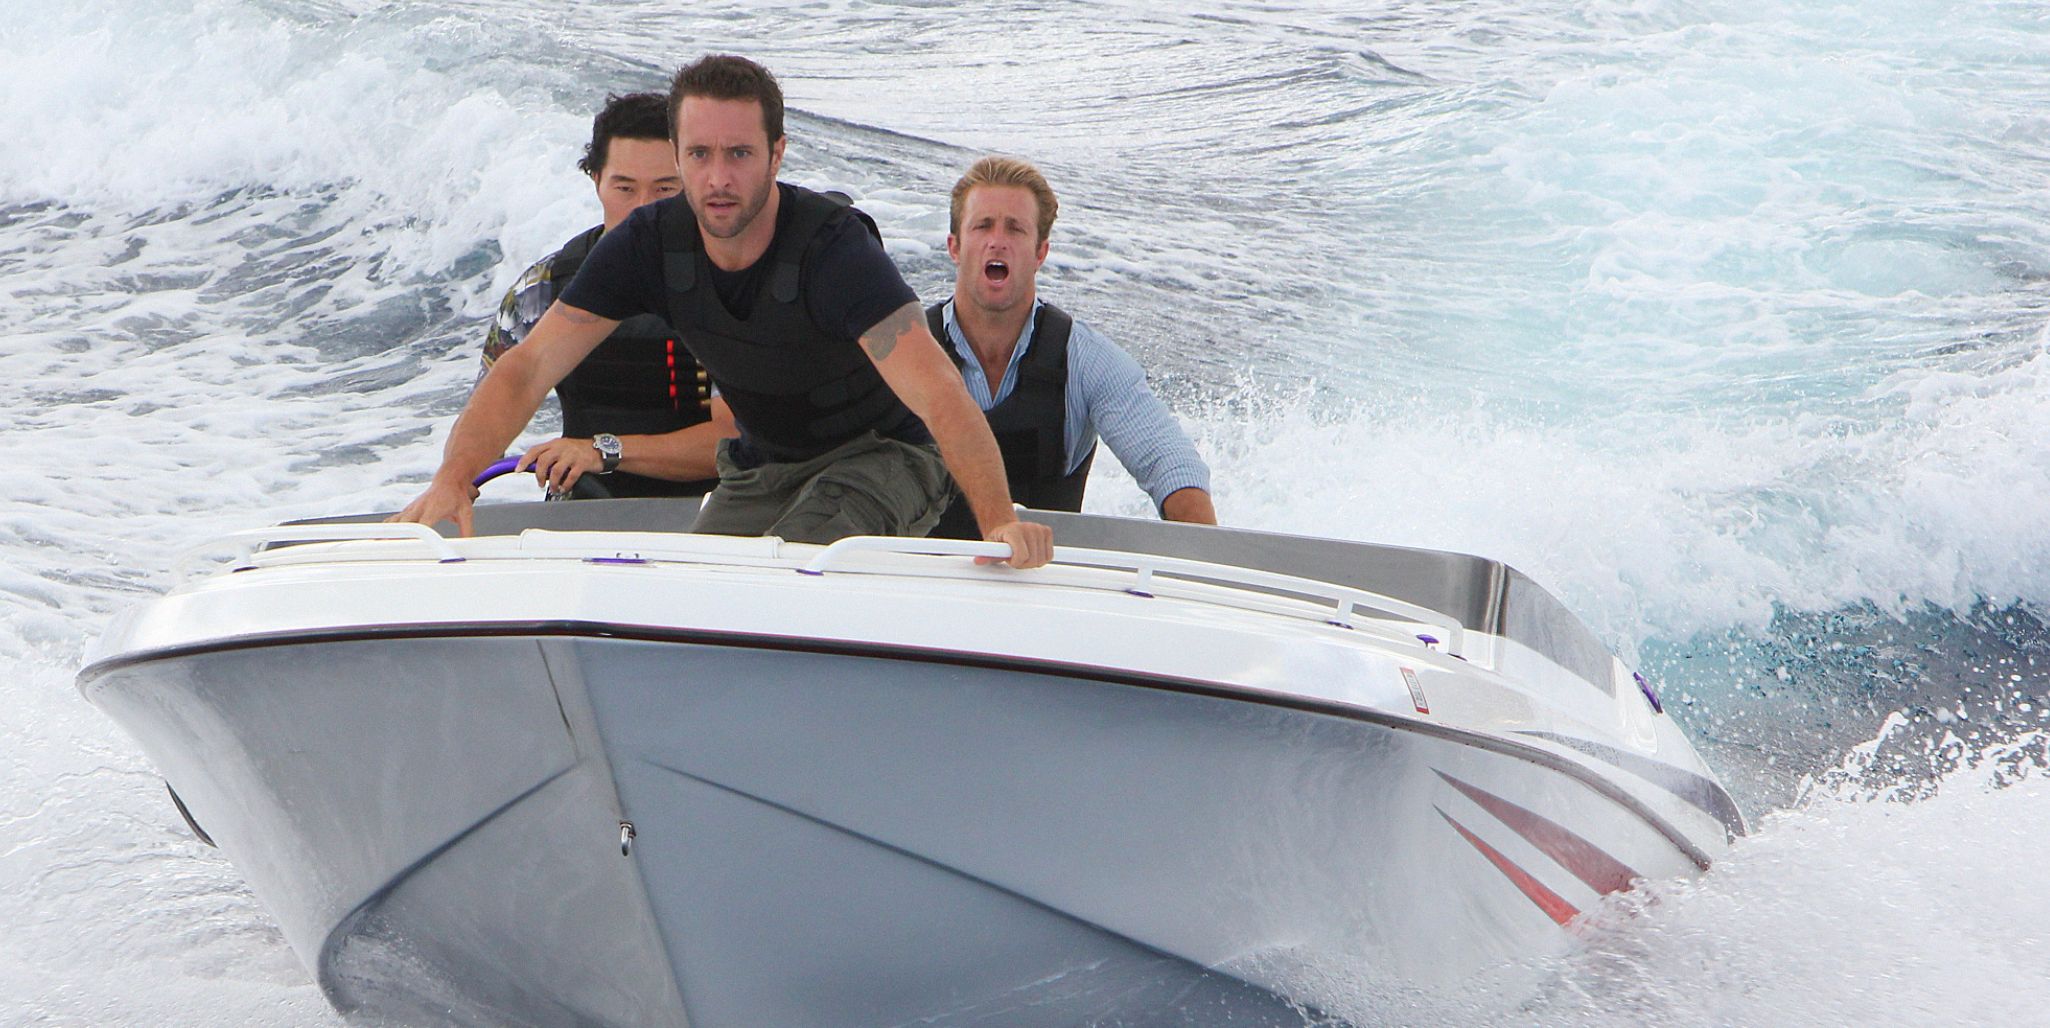 Chin, Steve, and Danny on a speedboat in Hawaii Five-0